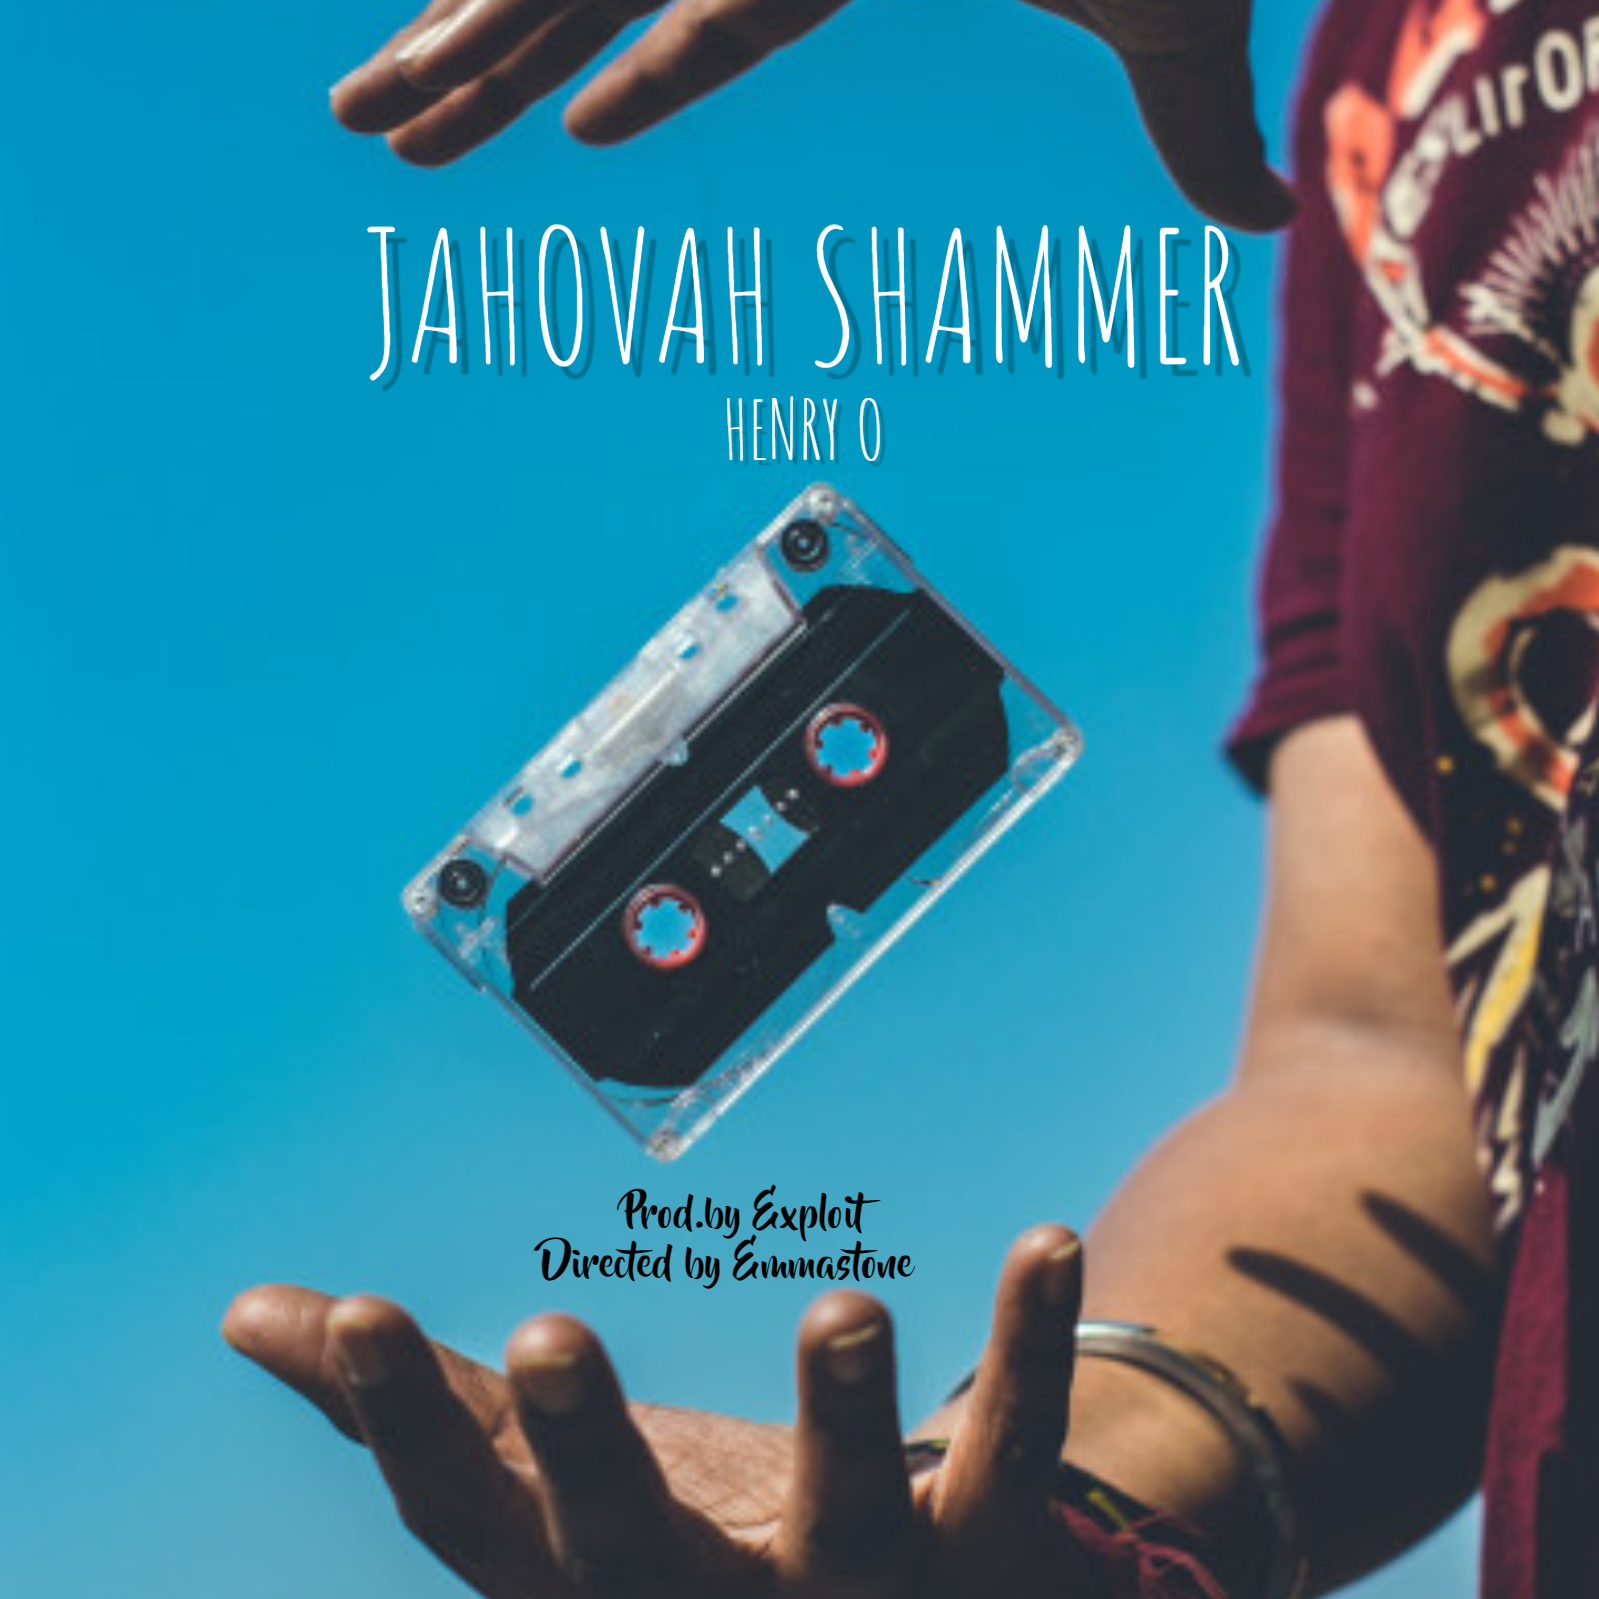 “Jehovah Shammer” By Henry O